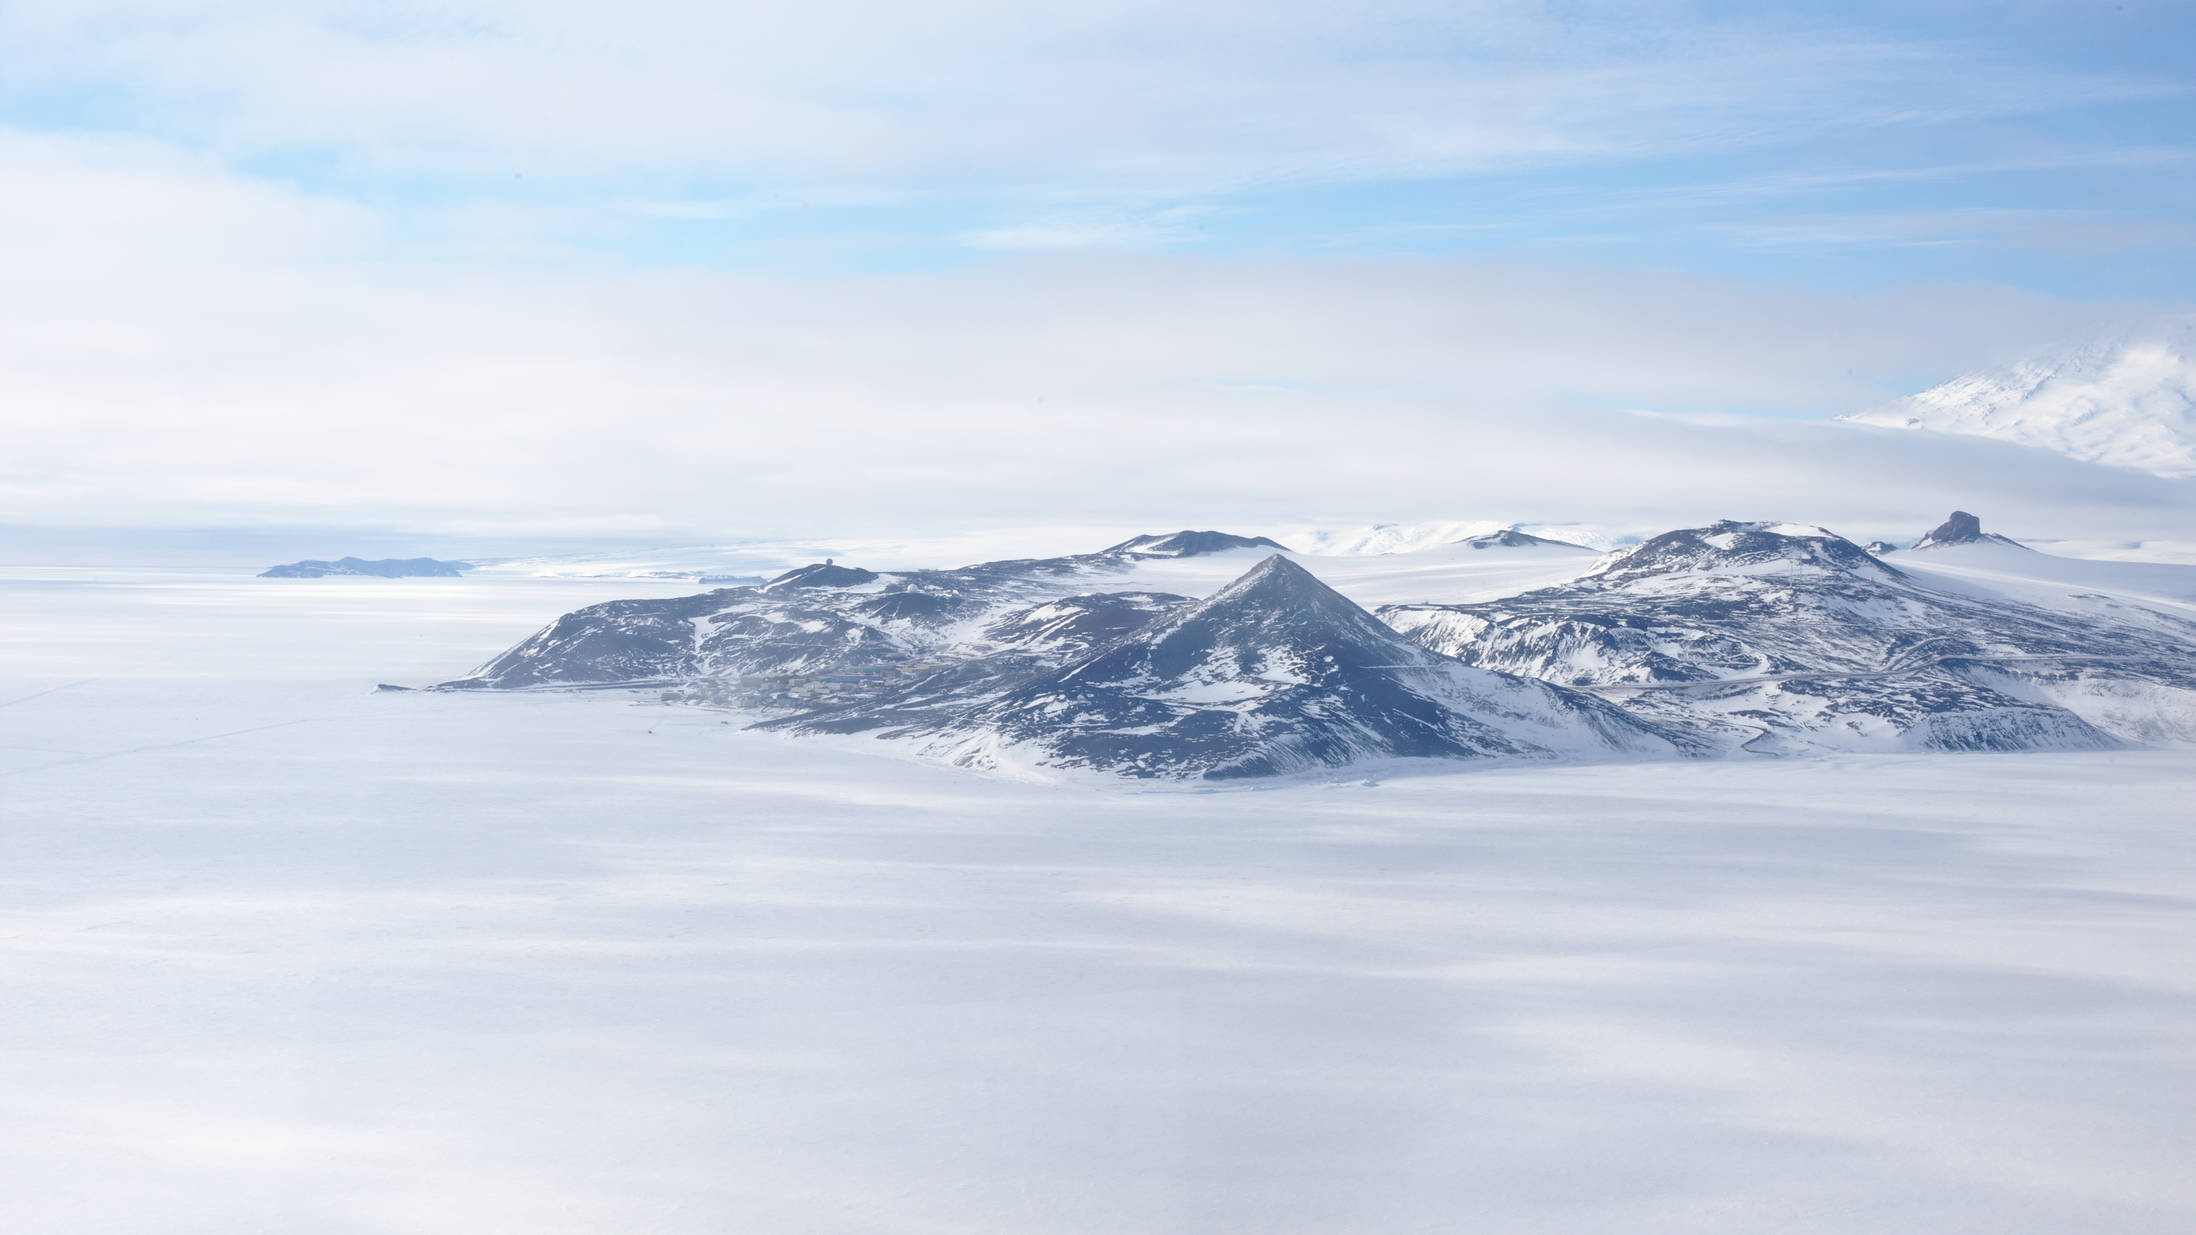 Ross Island - home of McMurdo. Bottom left: Hut point. Middle, front (triangular) mountain: Observation Hill. Between those two: McMurdo. On the right: Castle Rock